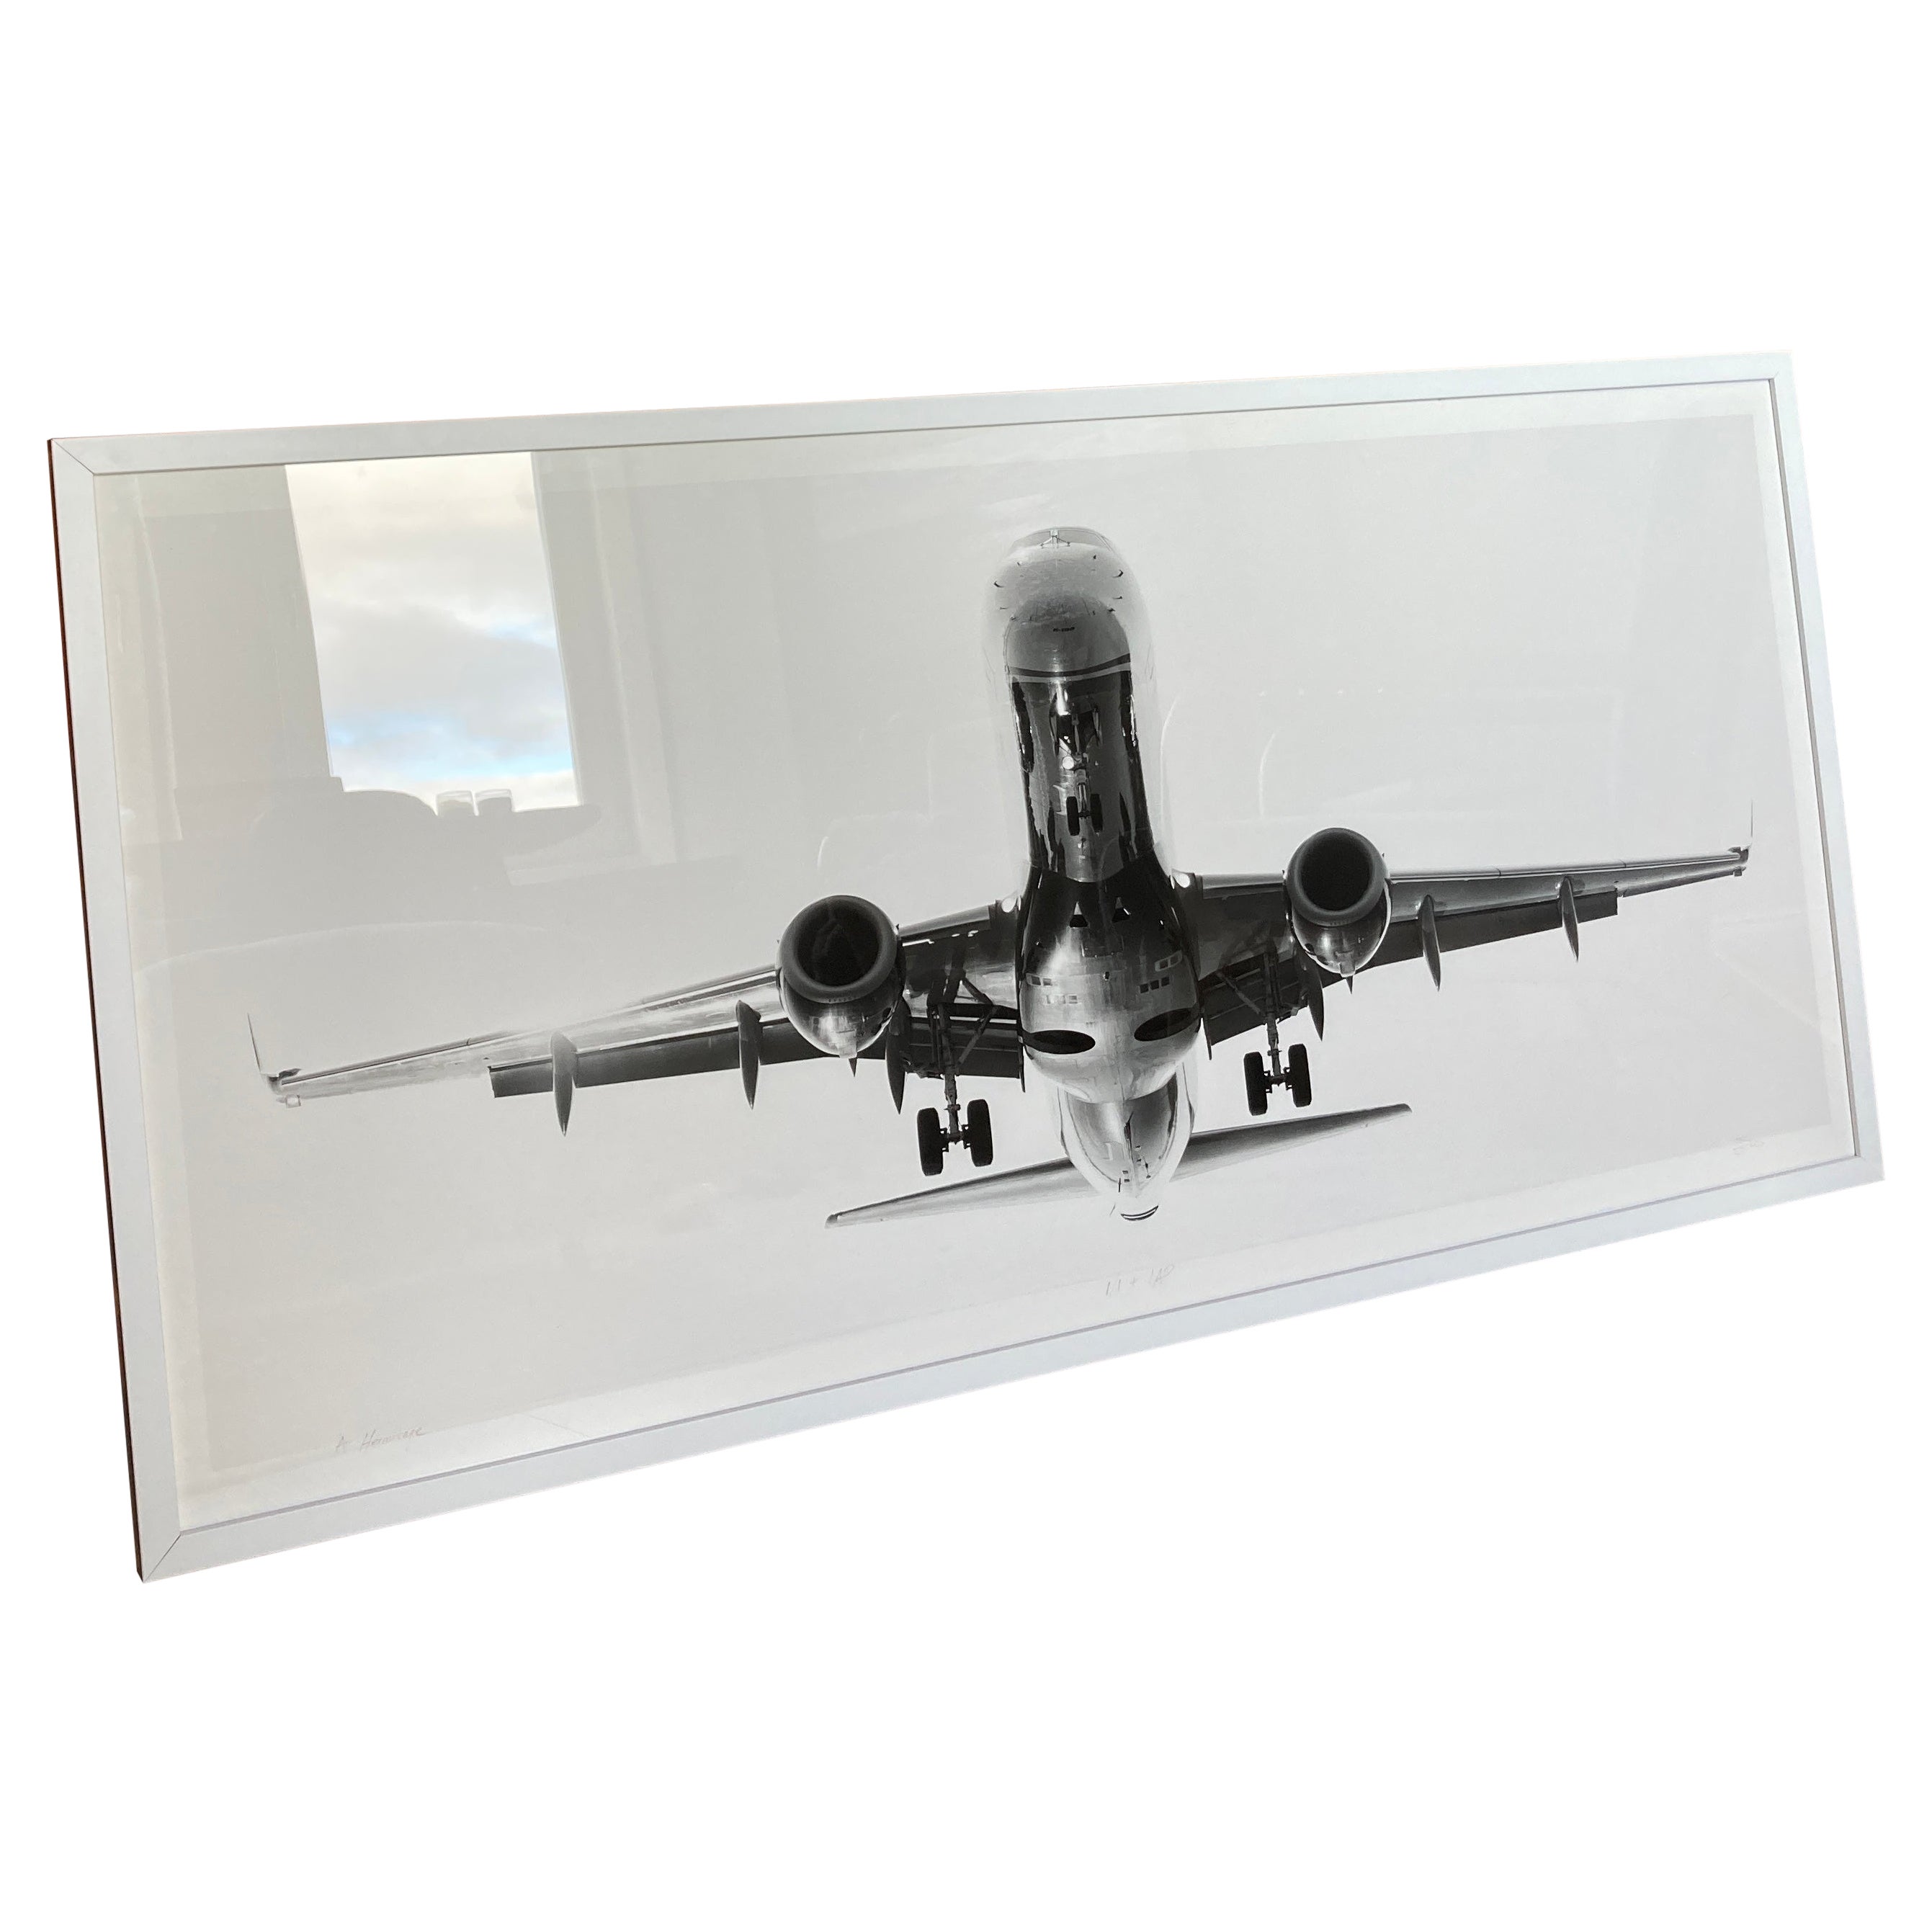 Hermitage 'Large Format Aviation Photograph' For Sale